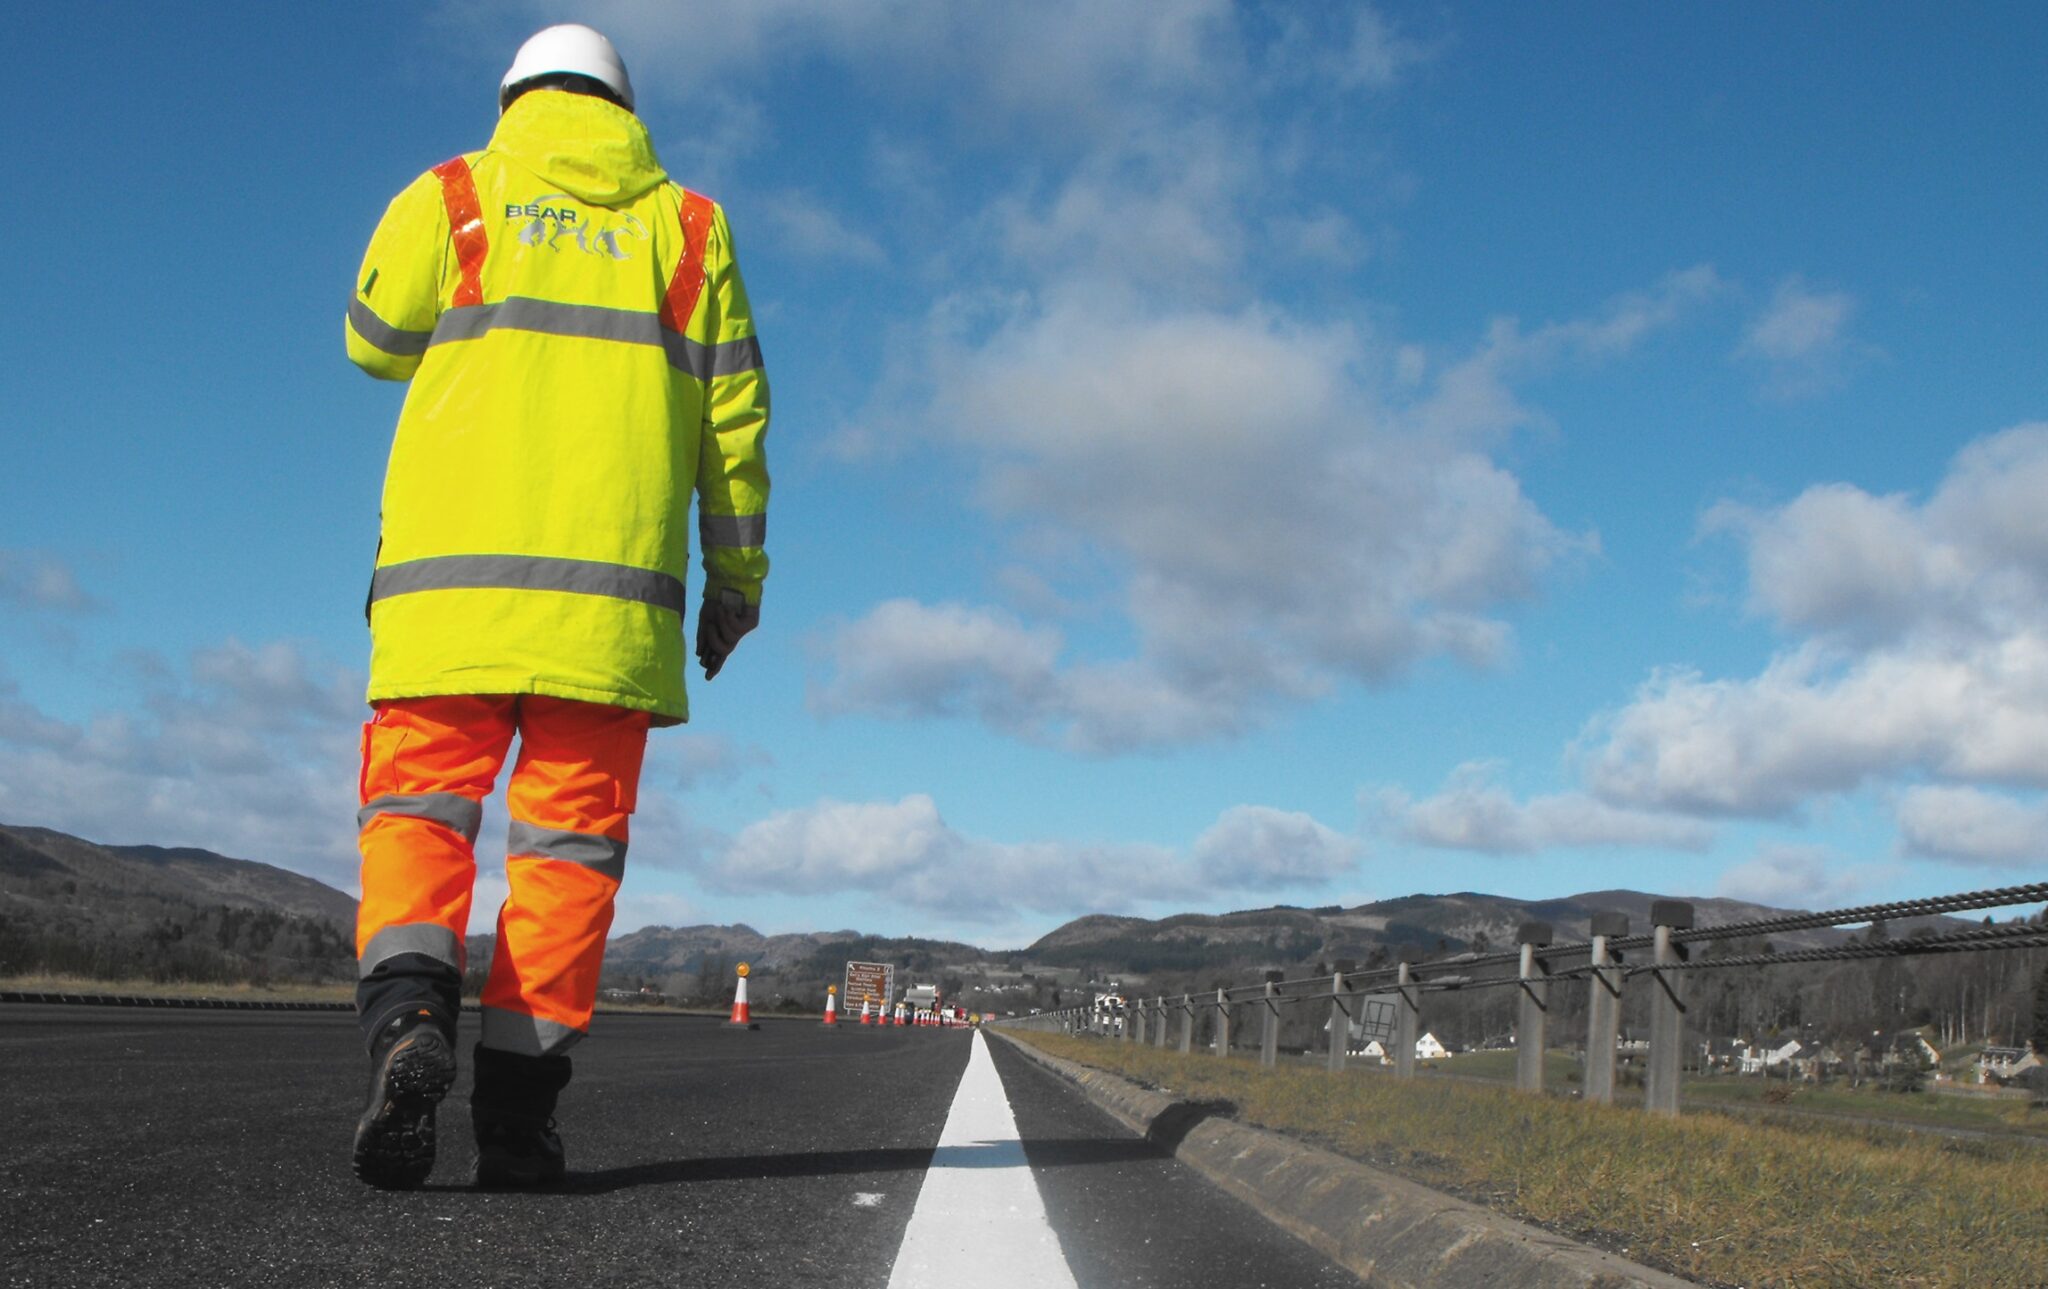 RESURFACING WORKS ON THE A702 SOUTH OF CAMBWELL JUNCTION